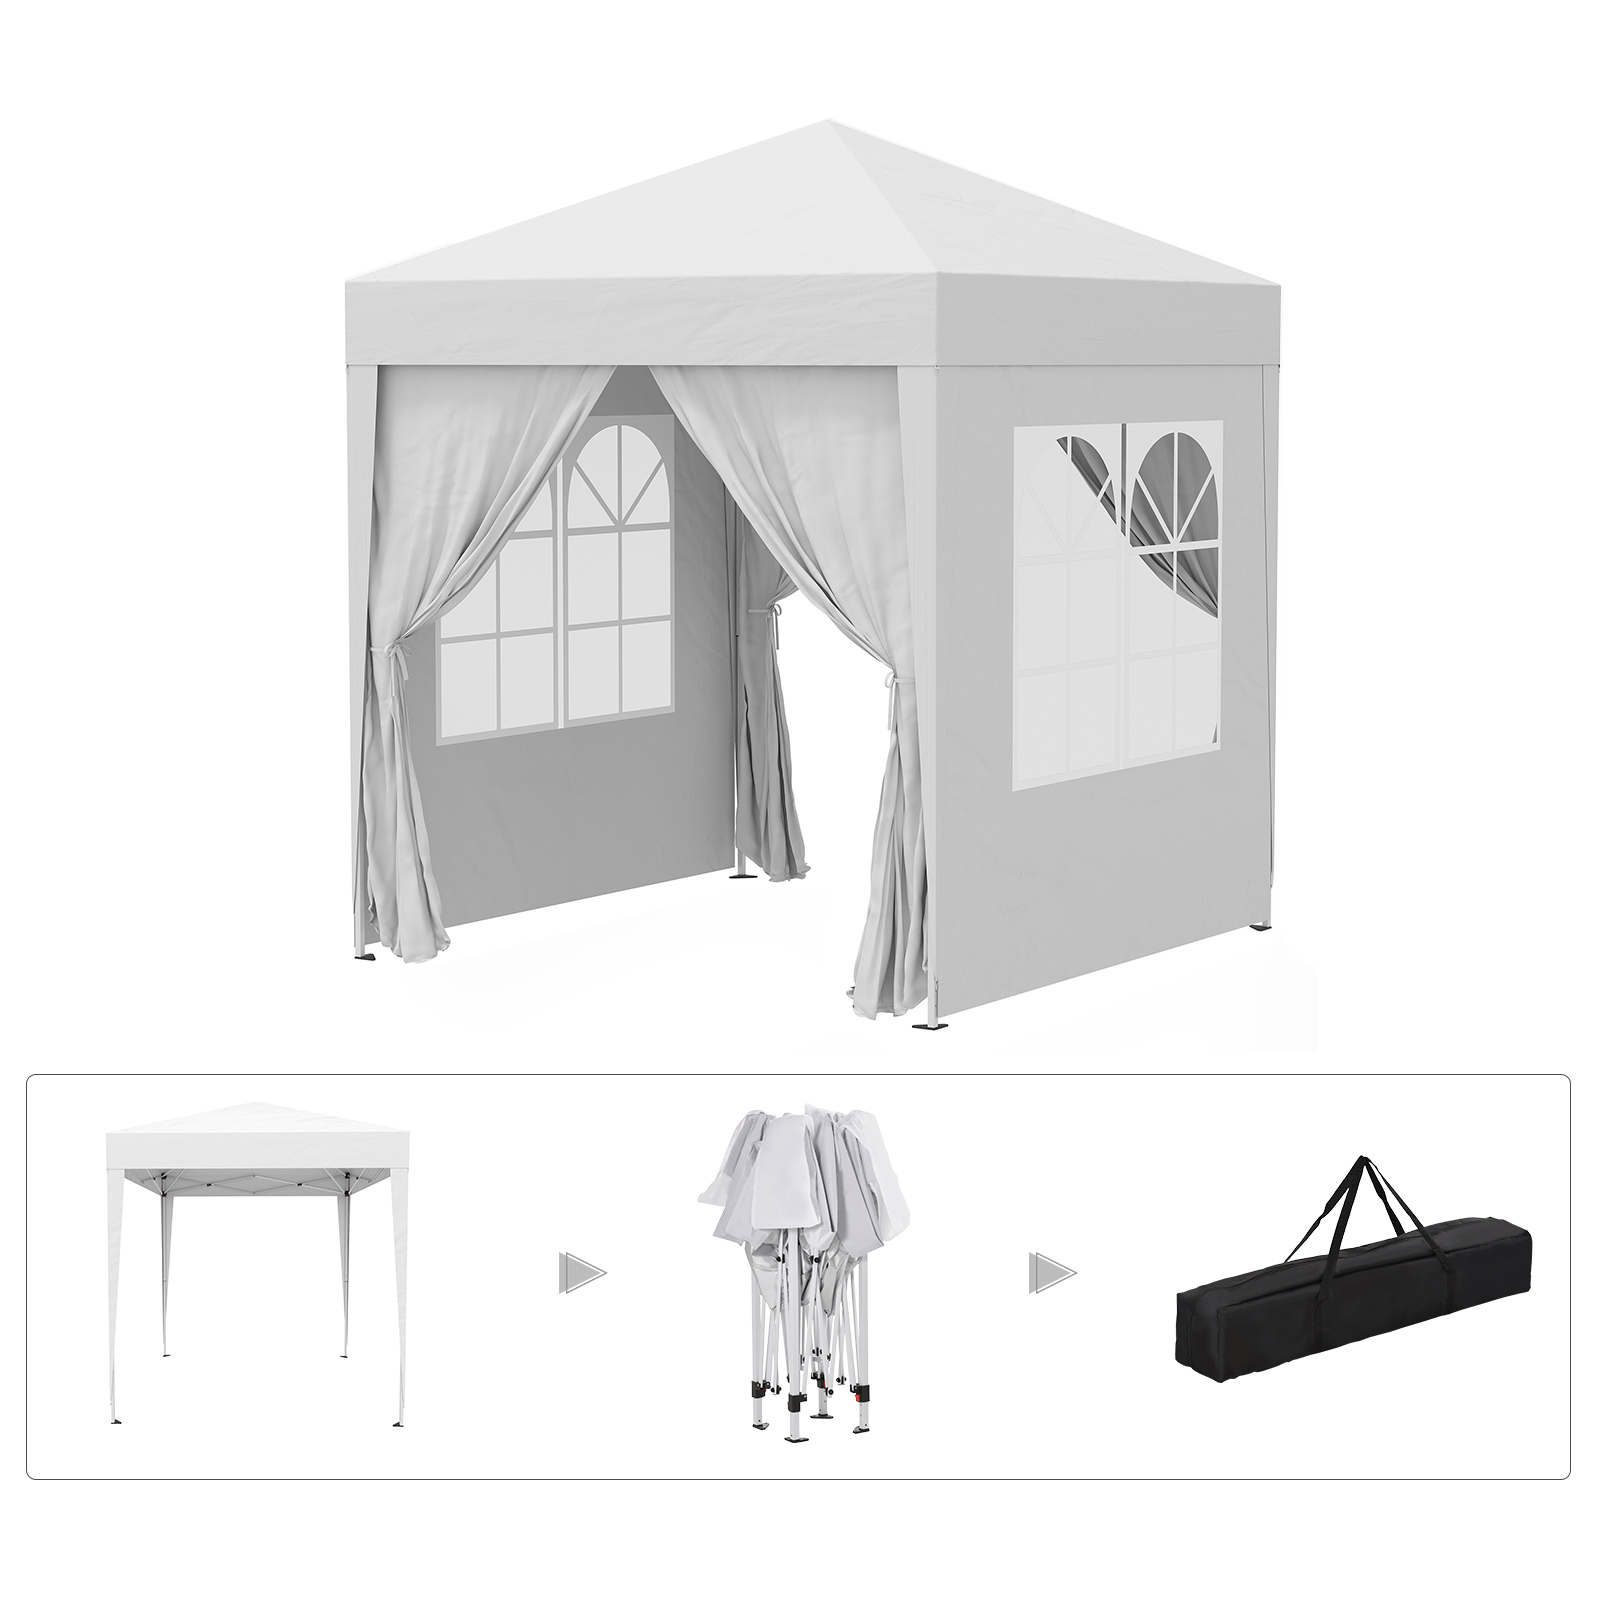 Outsunny 2 x 2m White Marquee Gazebo Party Tent Image 5